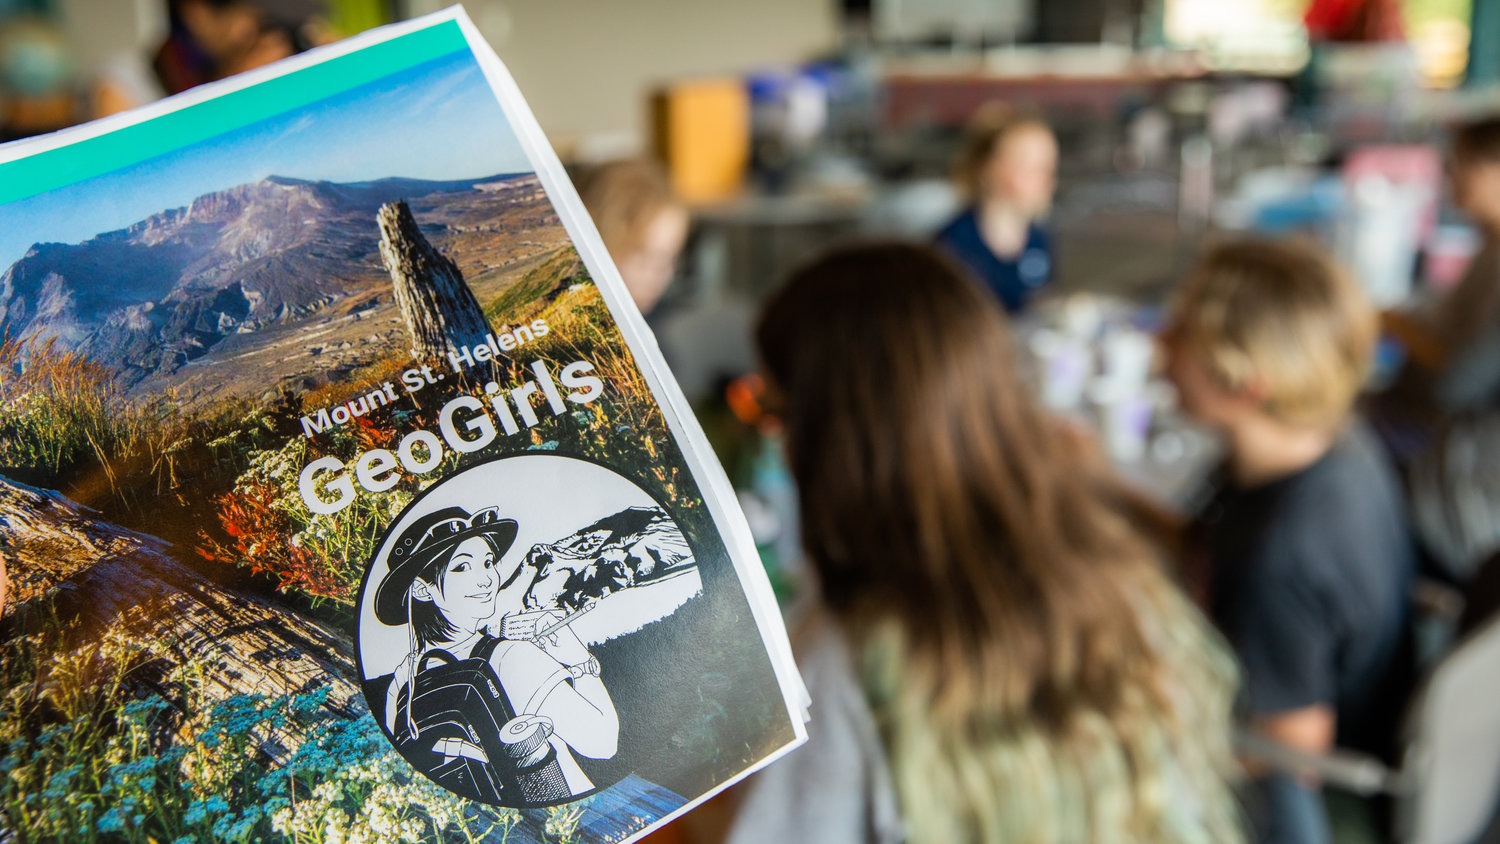 A GeoGirls pamphlet is displayed at the Mount St. Helens Science and Learning Center at Coldwater.